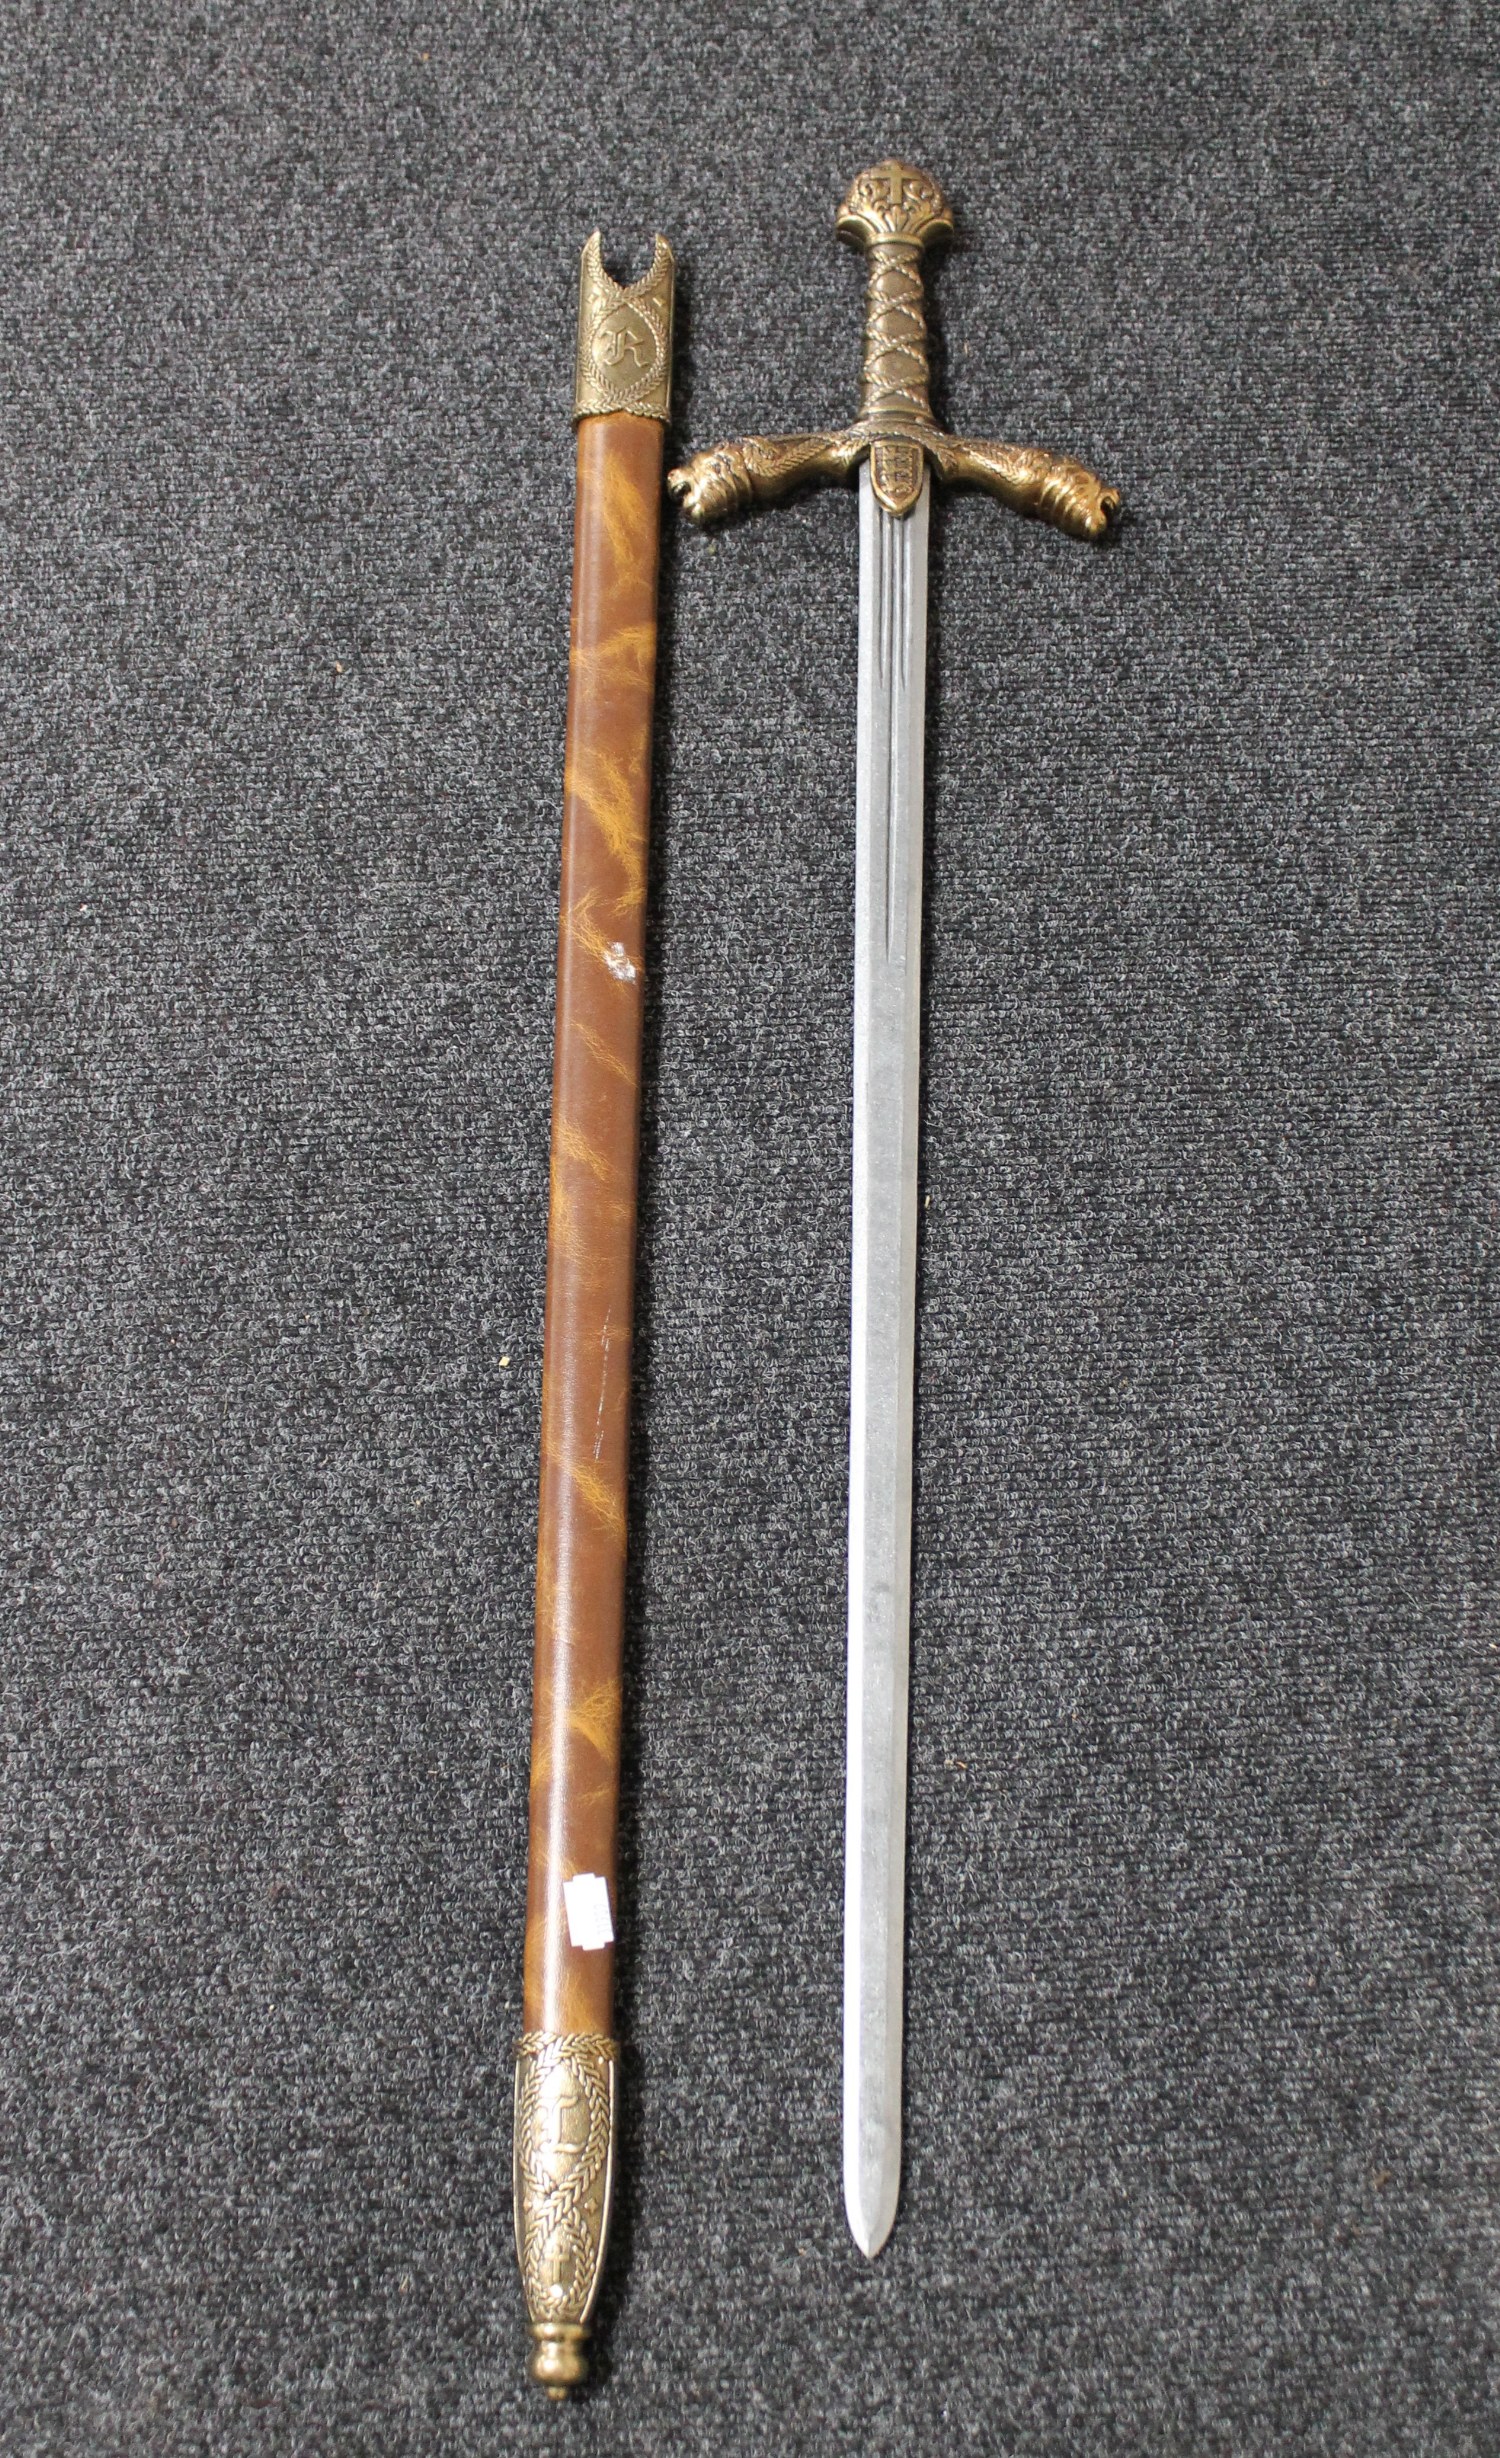 An ornamental ceremonial sword with lion mask handles